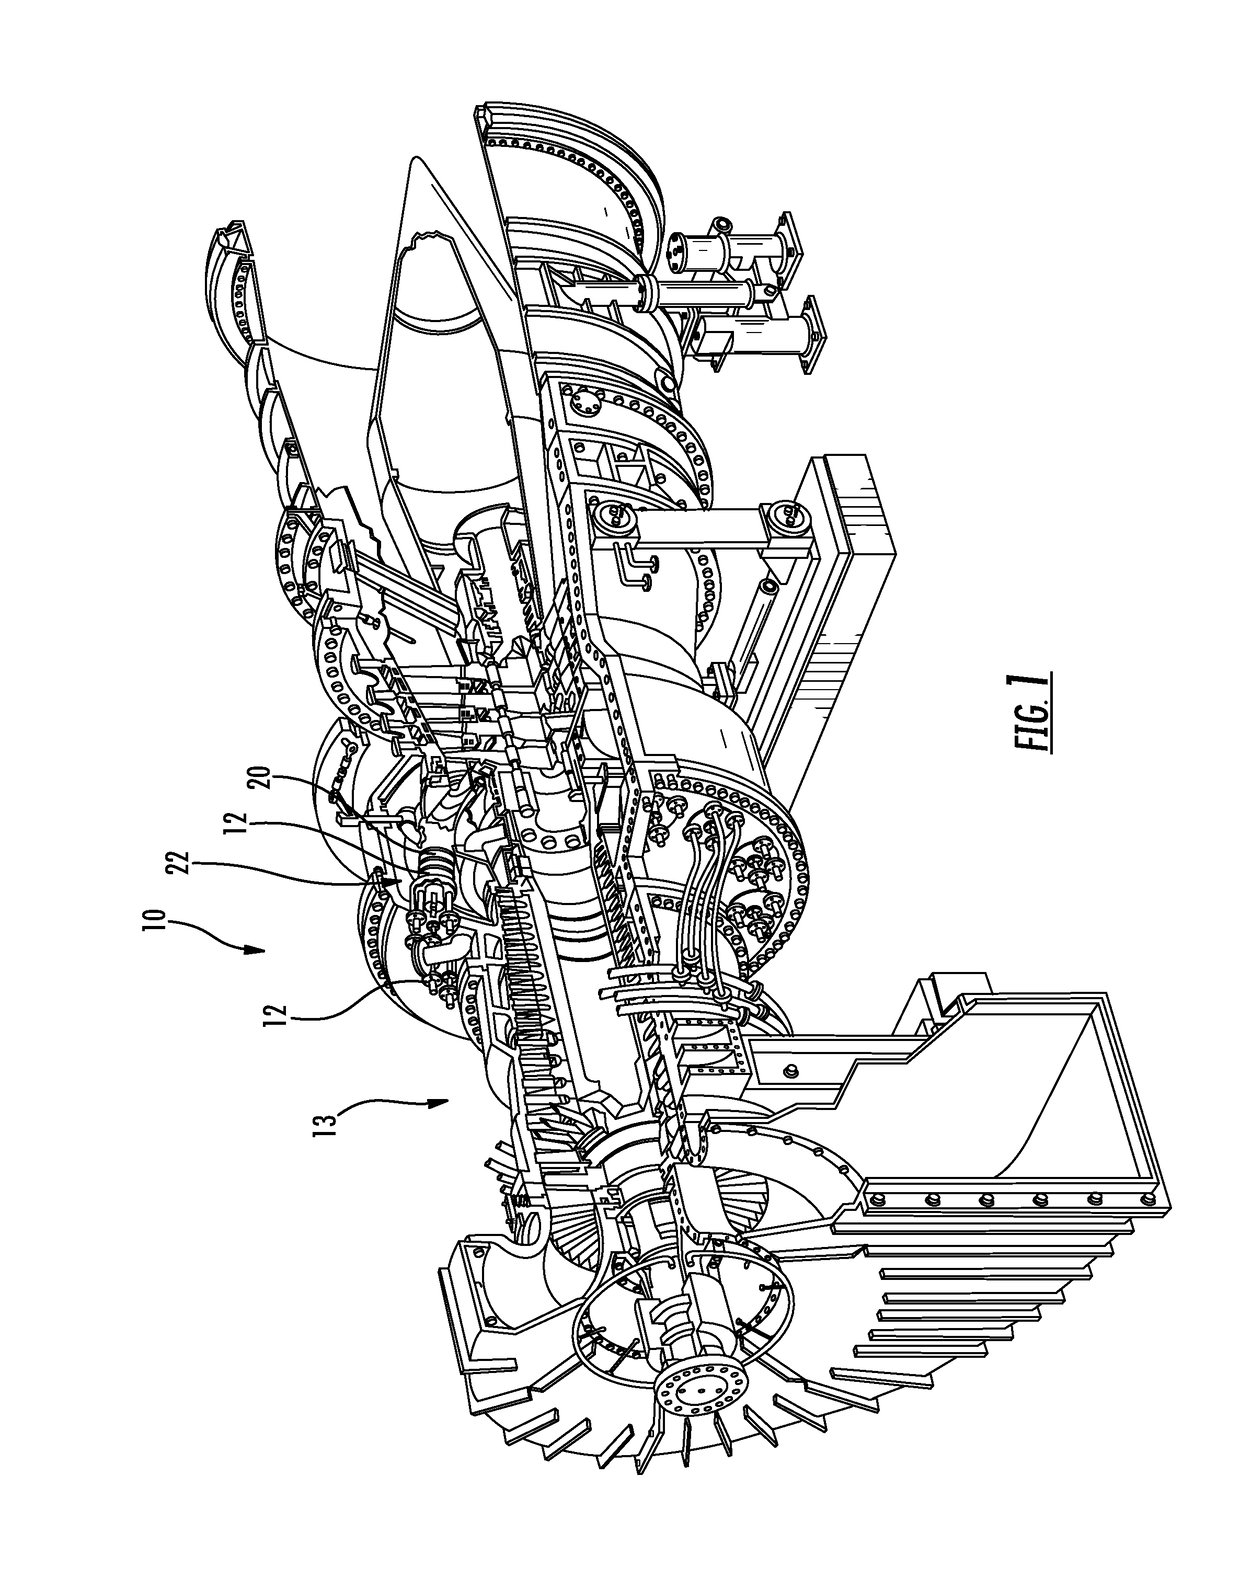 Acoustic damping system for a combustor of a gas turbine engine